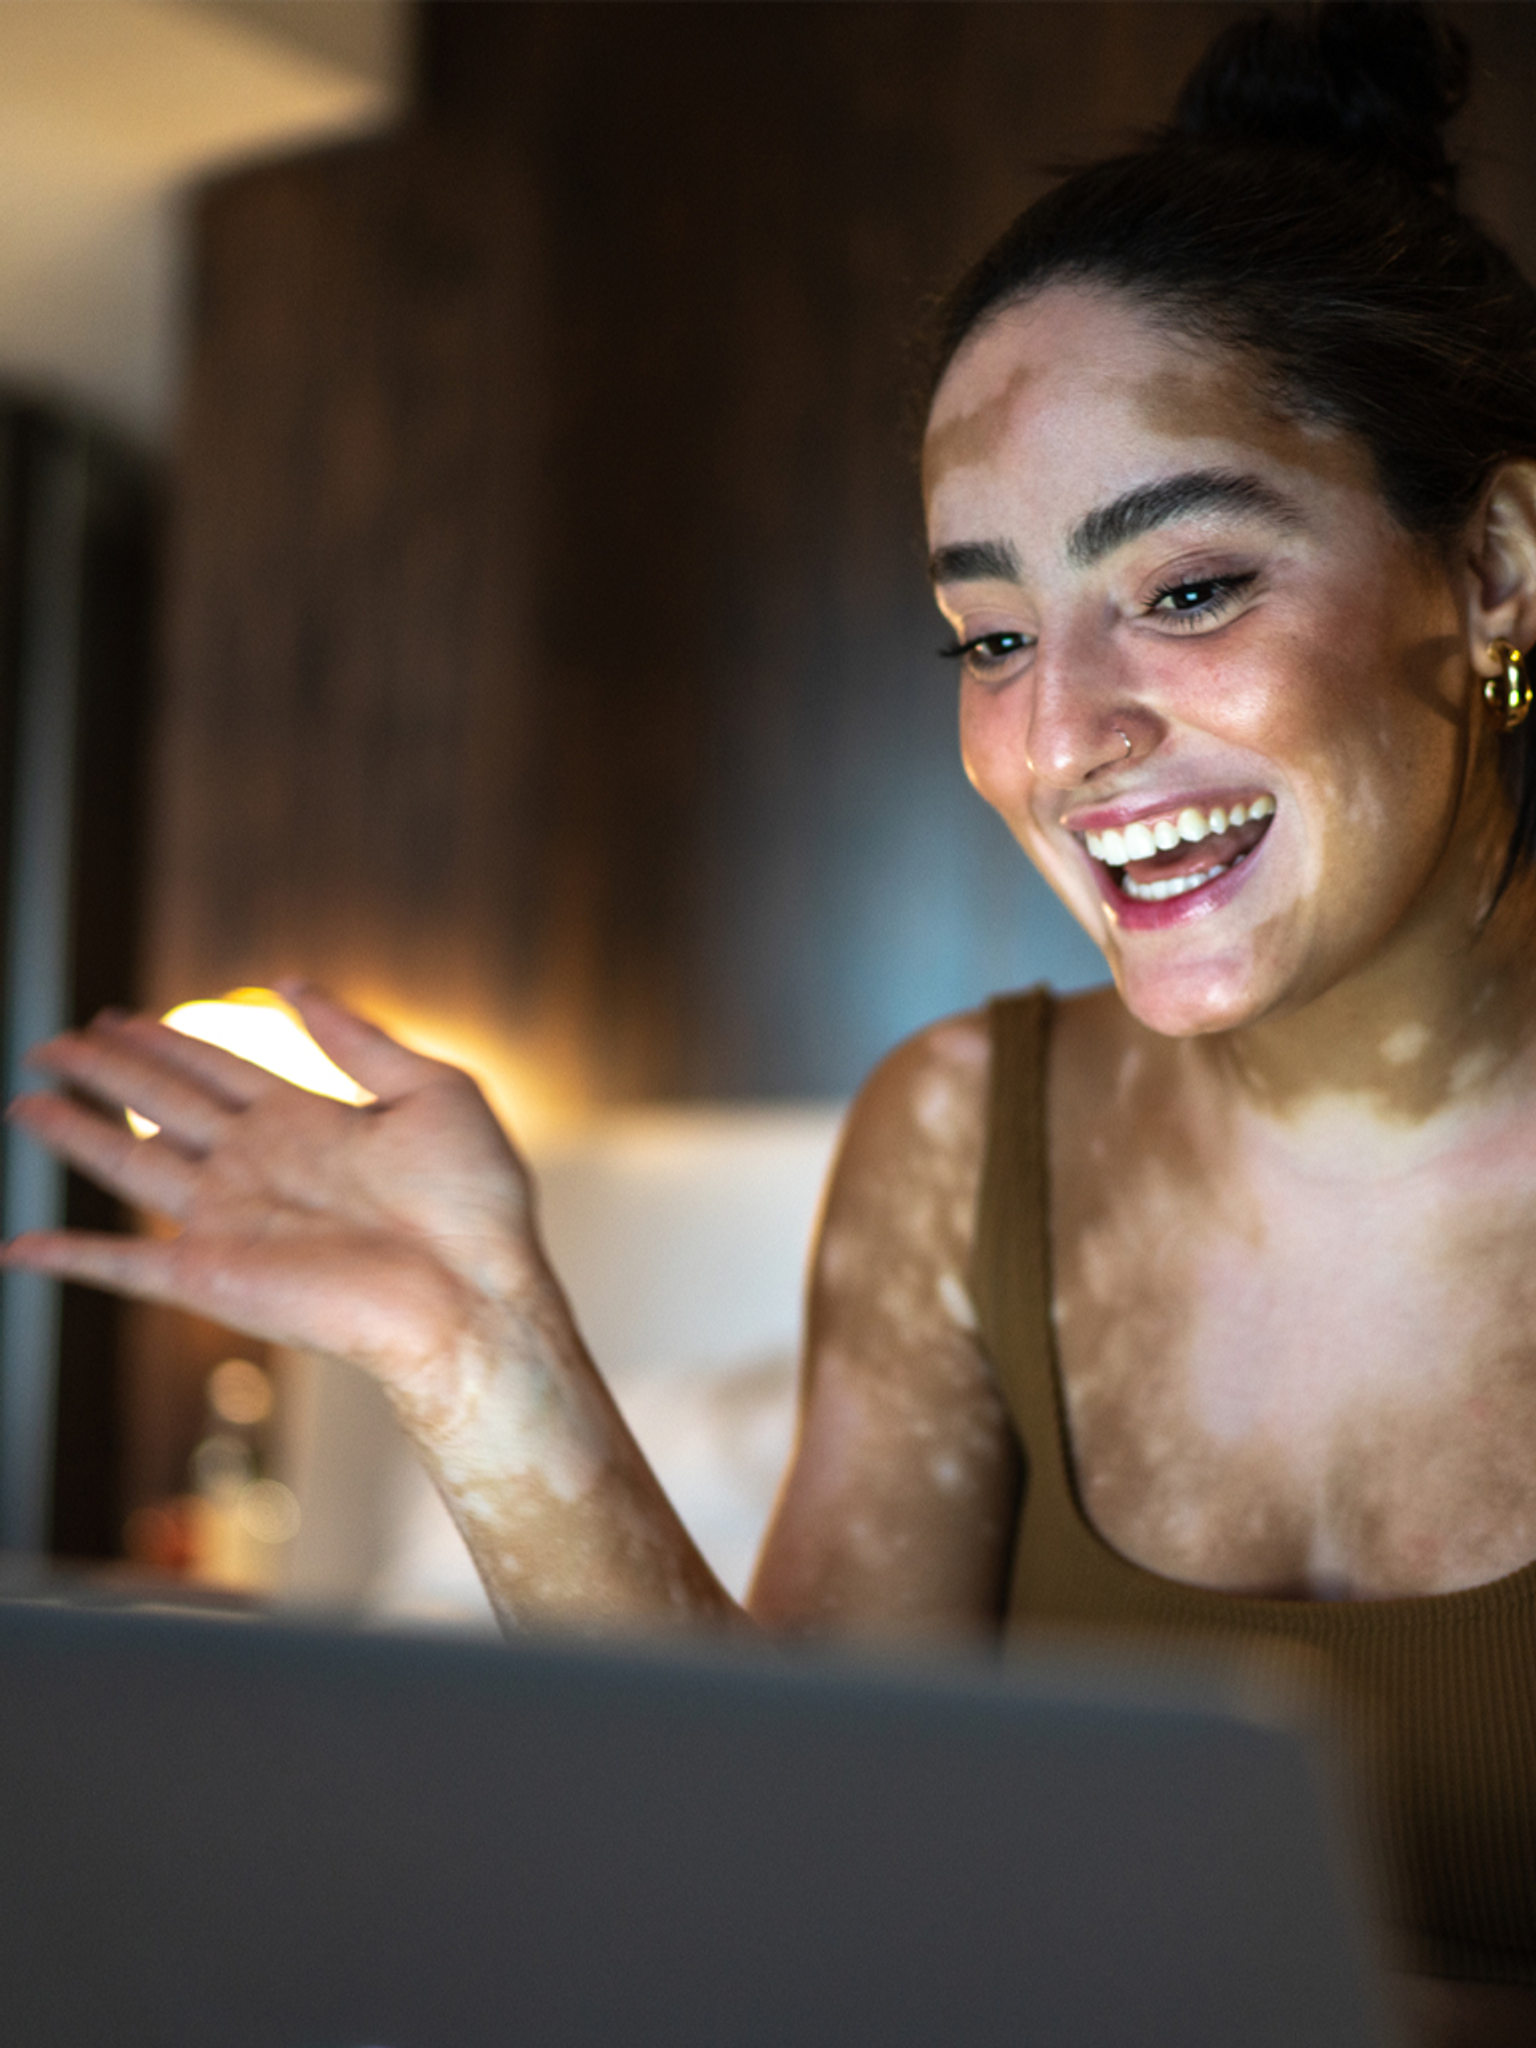 A woman with vitiligo smiles joyfully at her laptop screen in a warmly lit room.